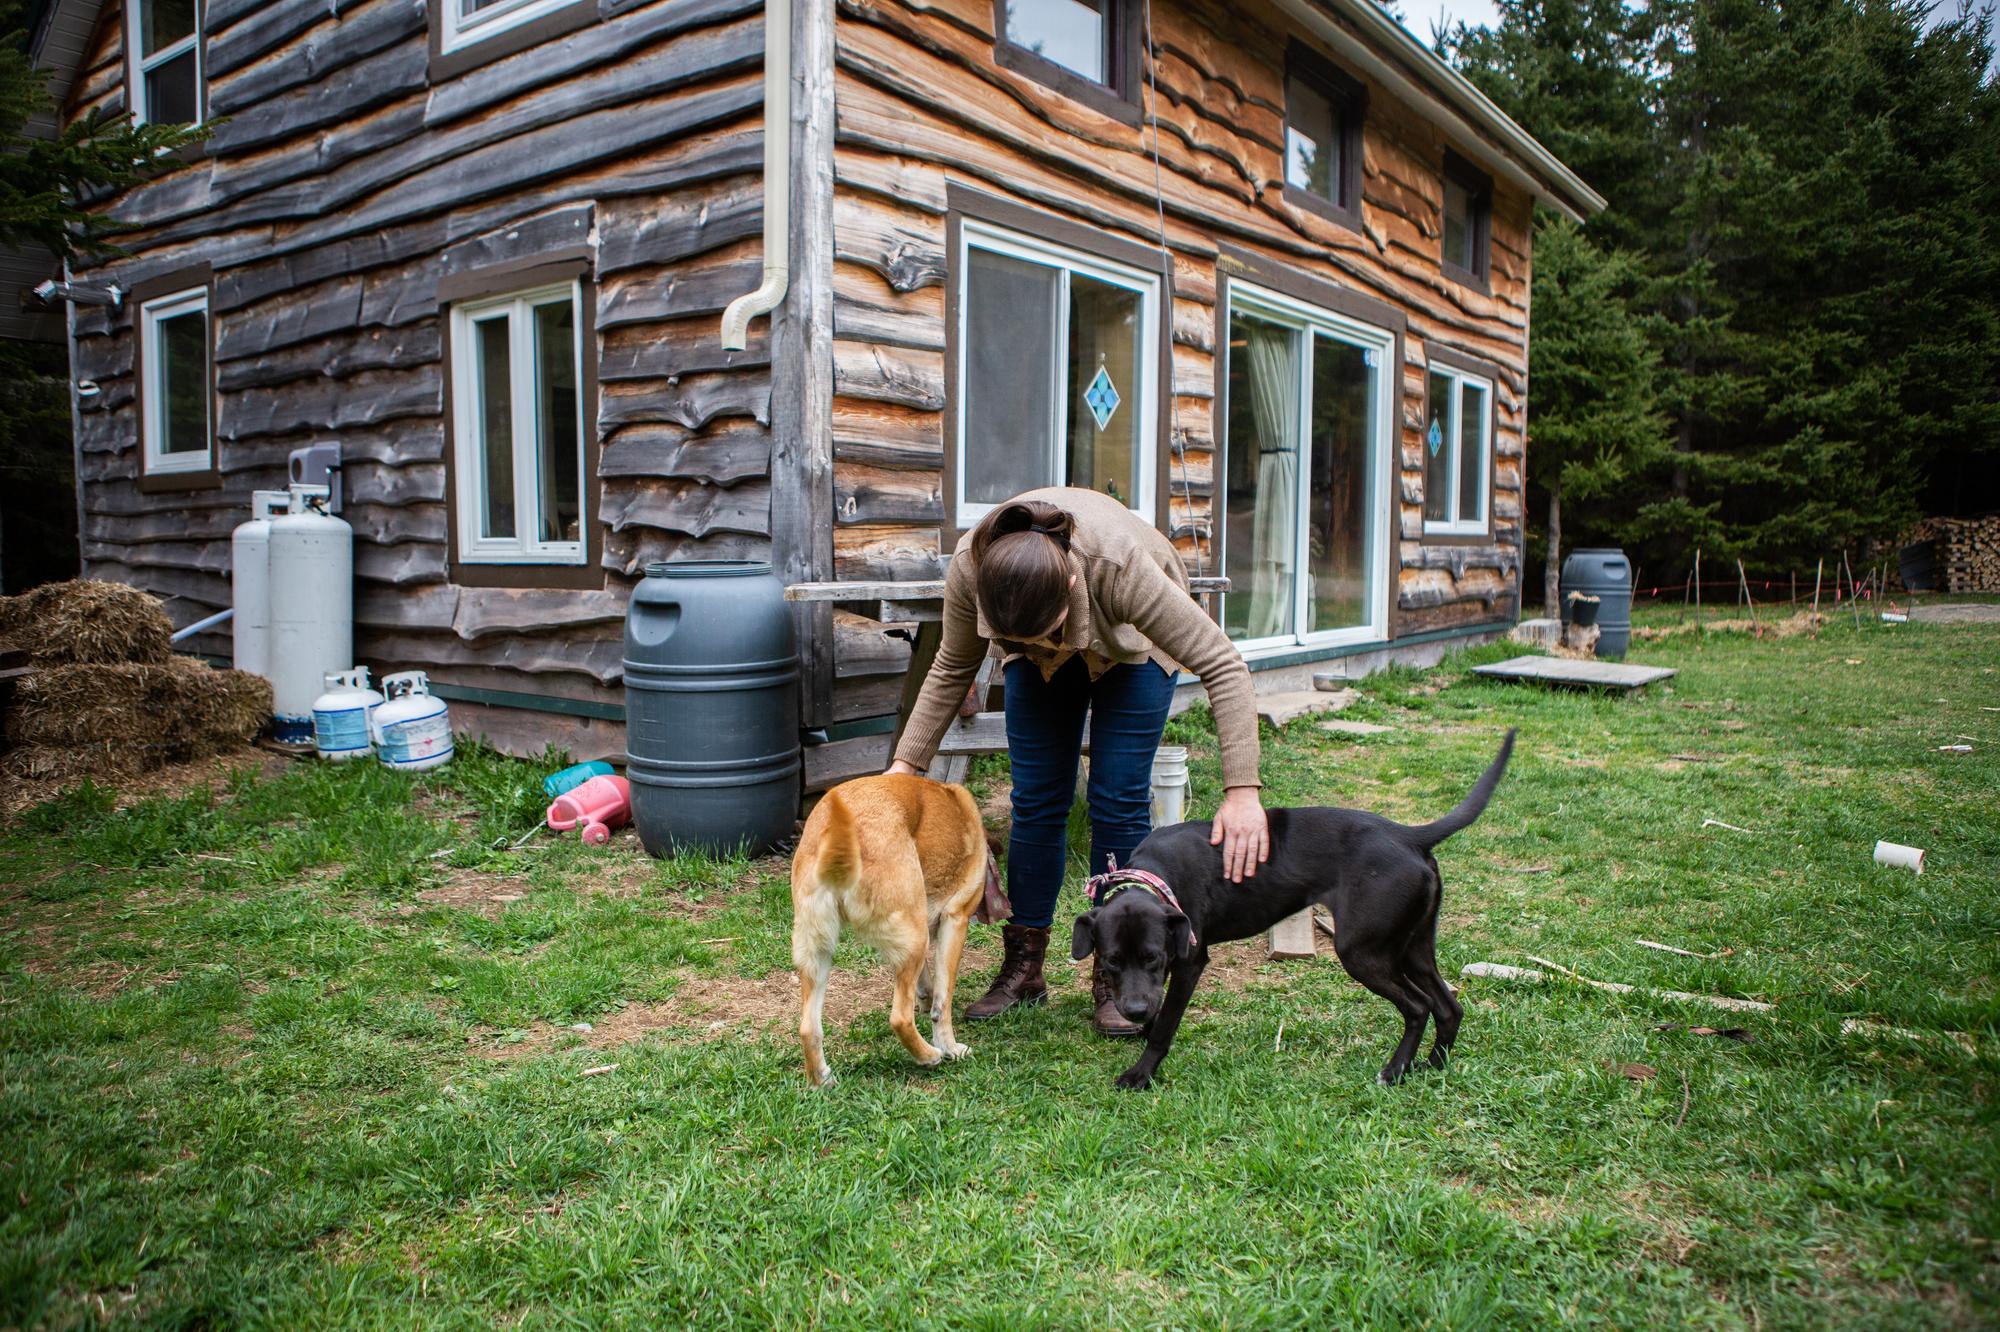 Ross lives in an off-grid home in Knowlesville, New Brunswick, with her partner and two dogs